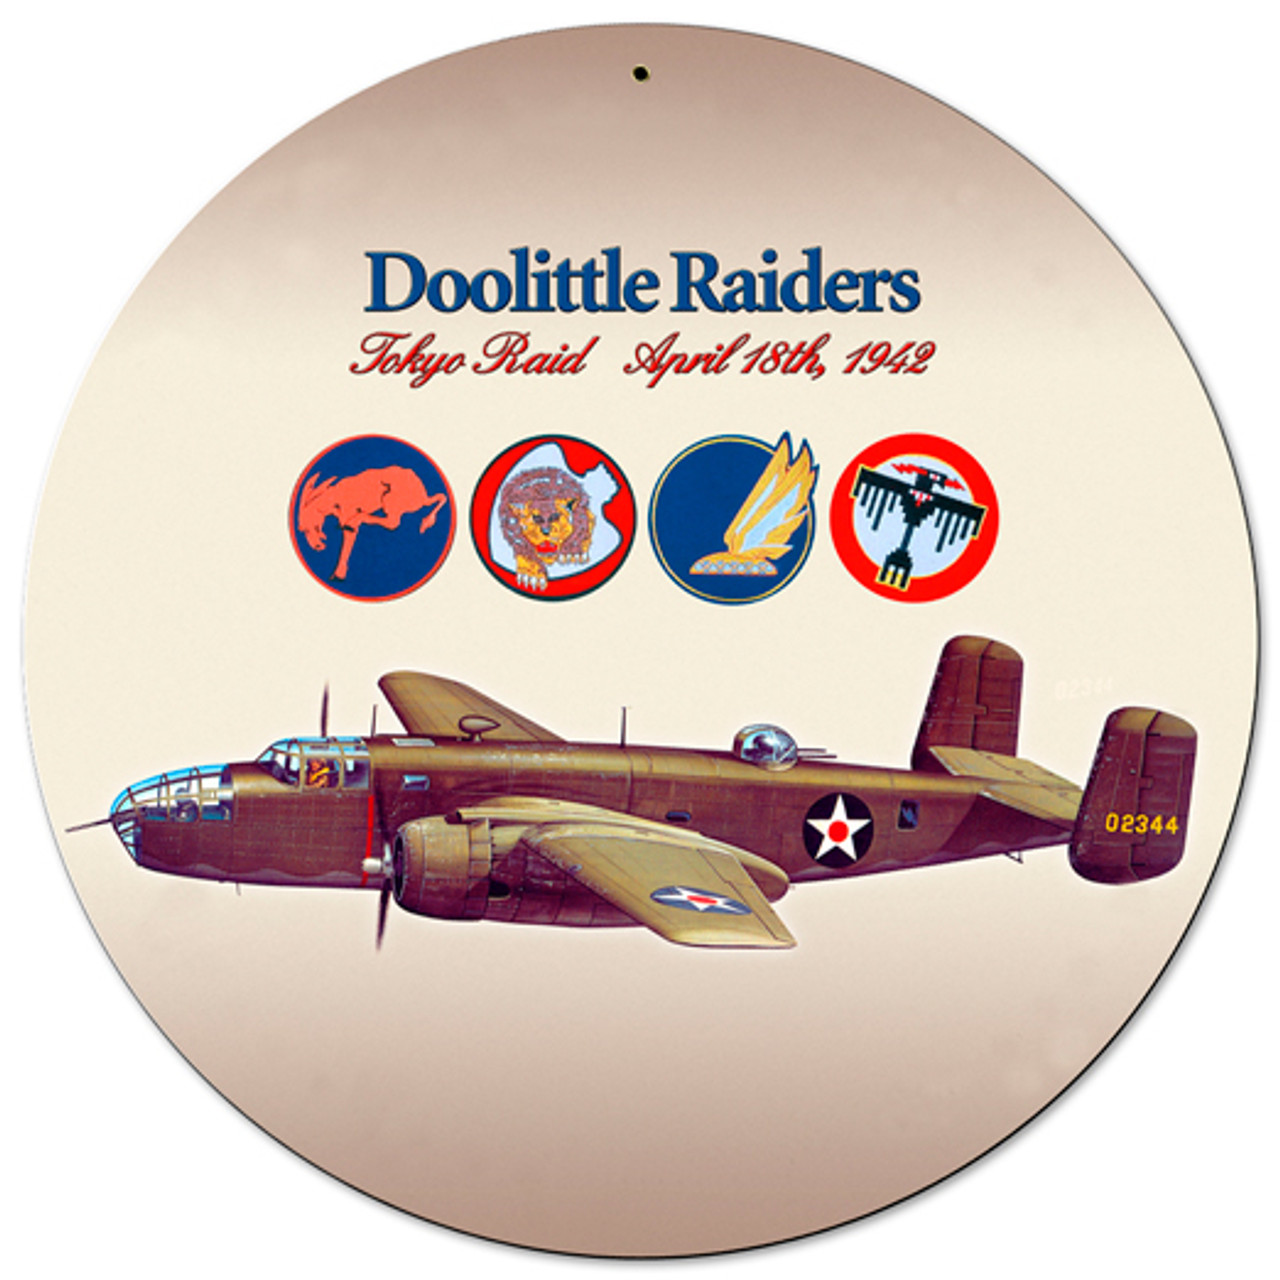 Doolittle Raiders Metal Sign 14 x 14 Inches